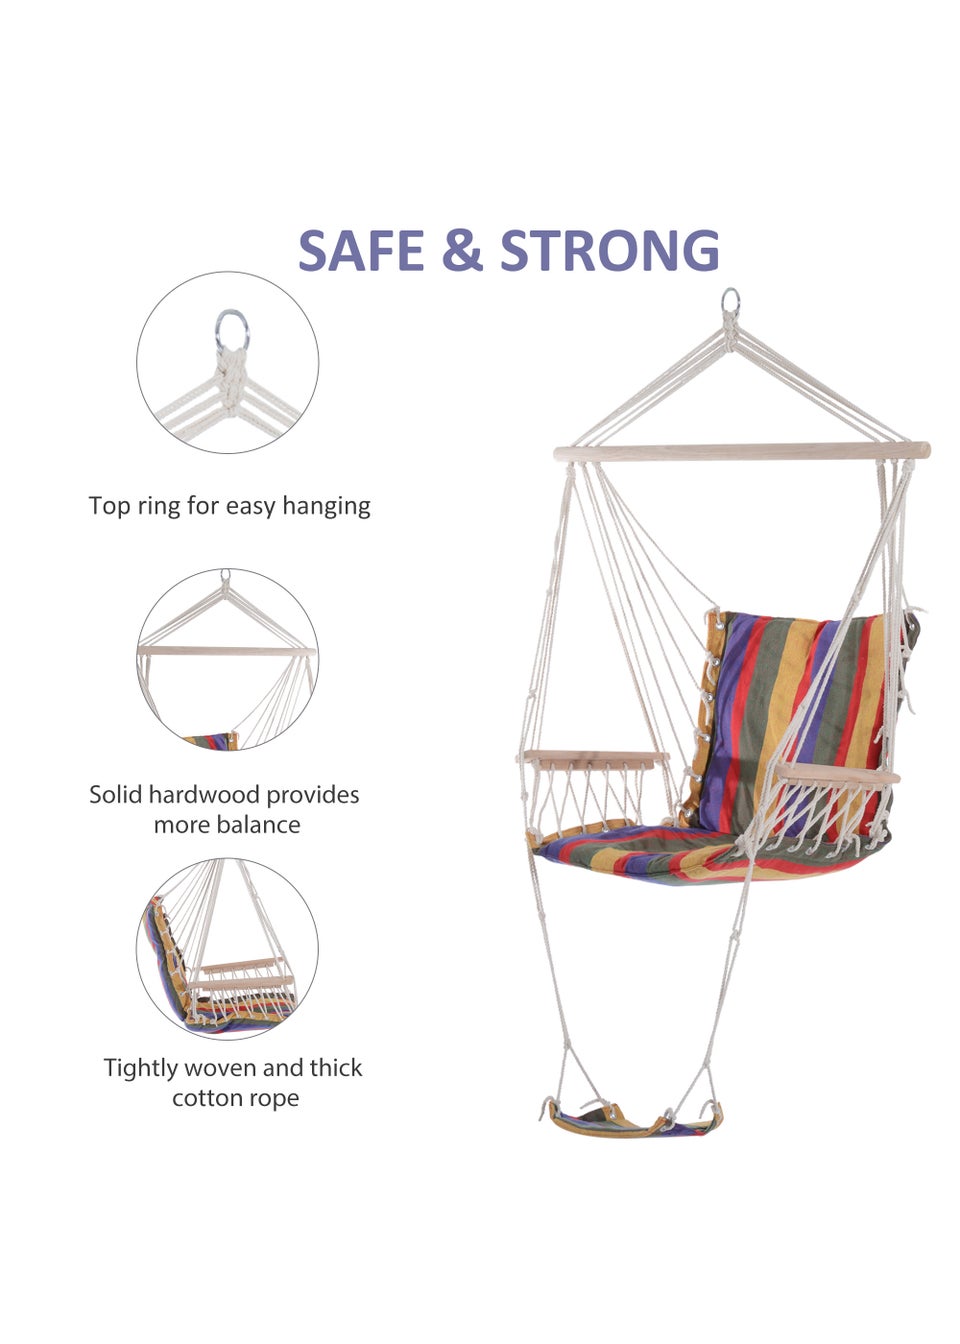 Outsunny Hammock Swing Chair Hanging Rope Striped Seat Foot Rest Indoor